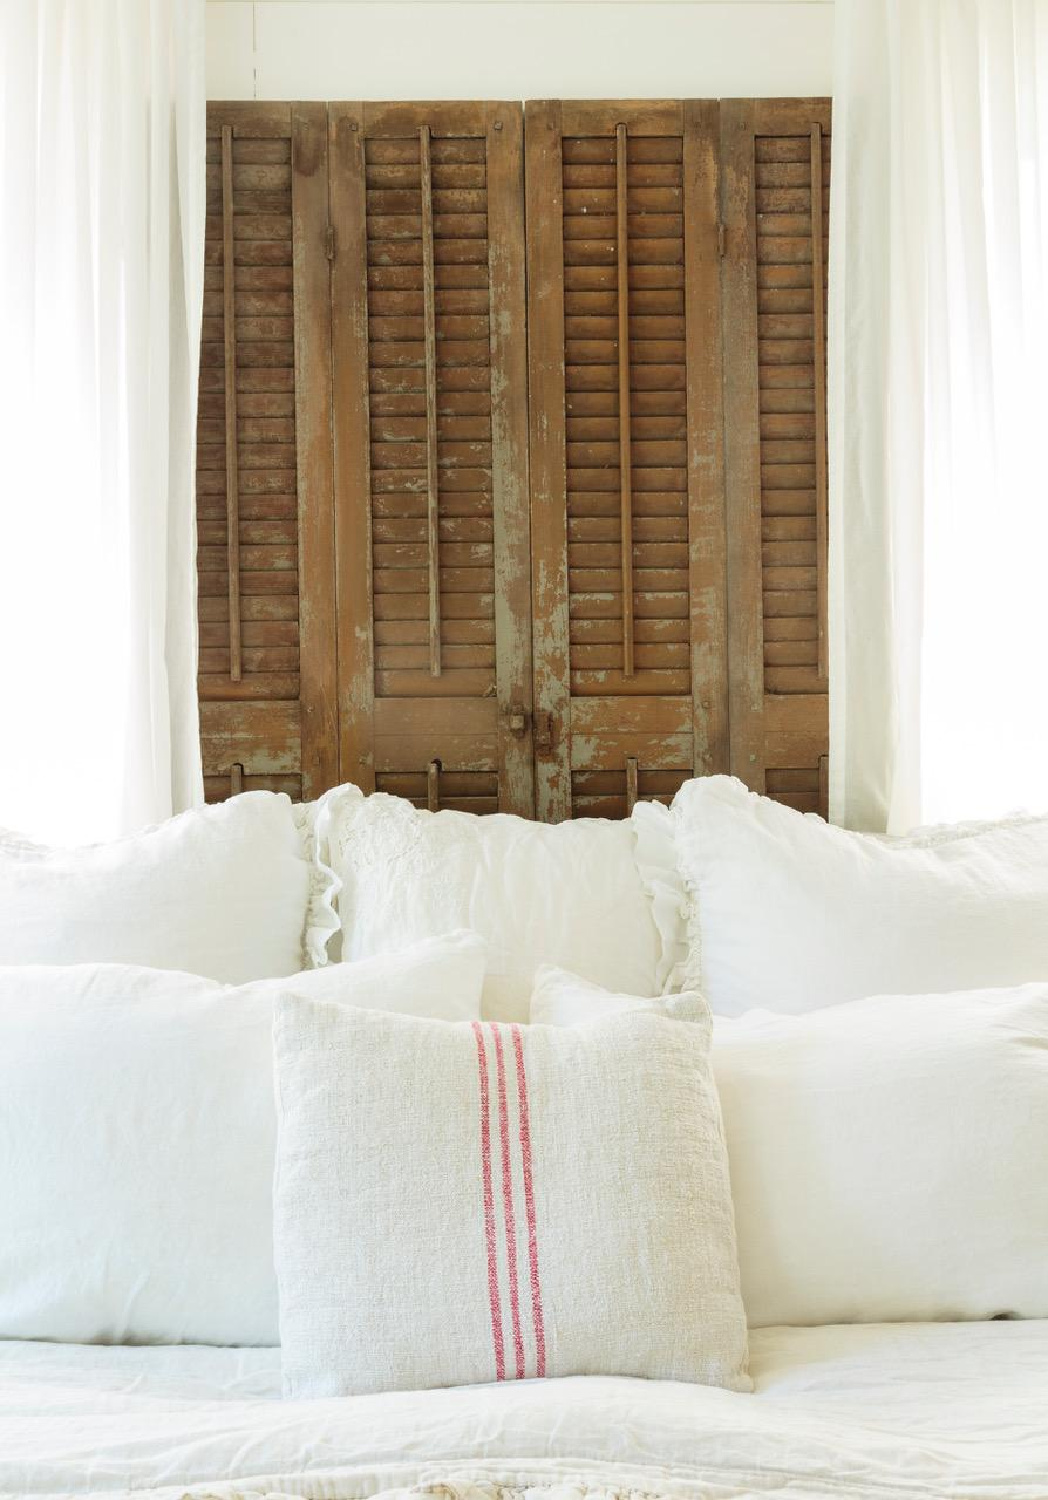 Rustic wood shutters as headboard in a white bedroom from Fifi O'Neill's SHADES OF WHITE (CICO Books, 2021). #fifioneill #whiteinteriors